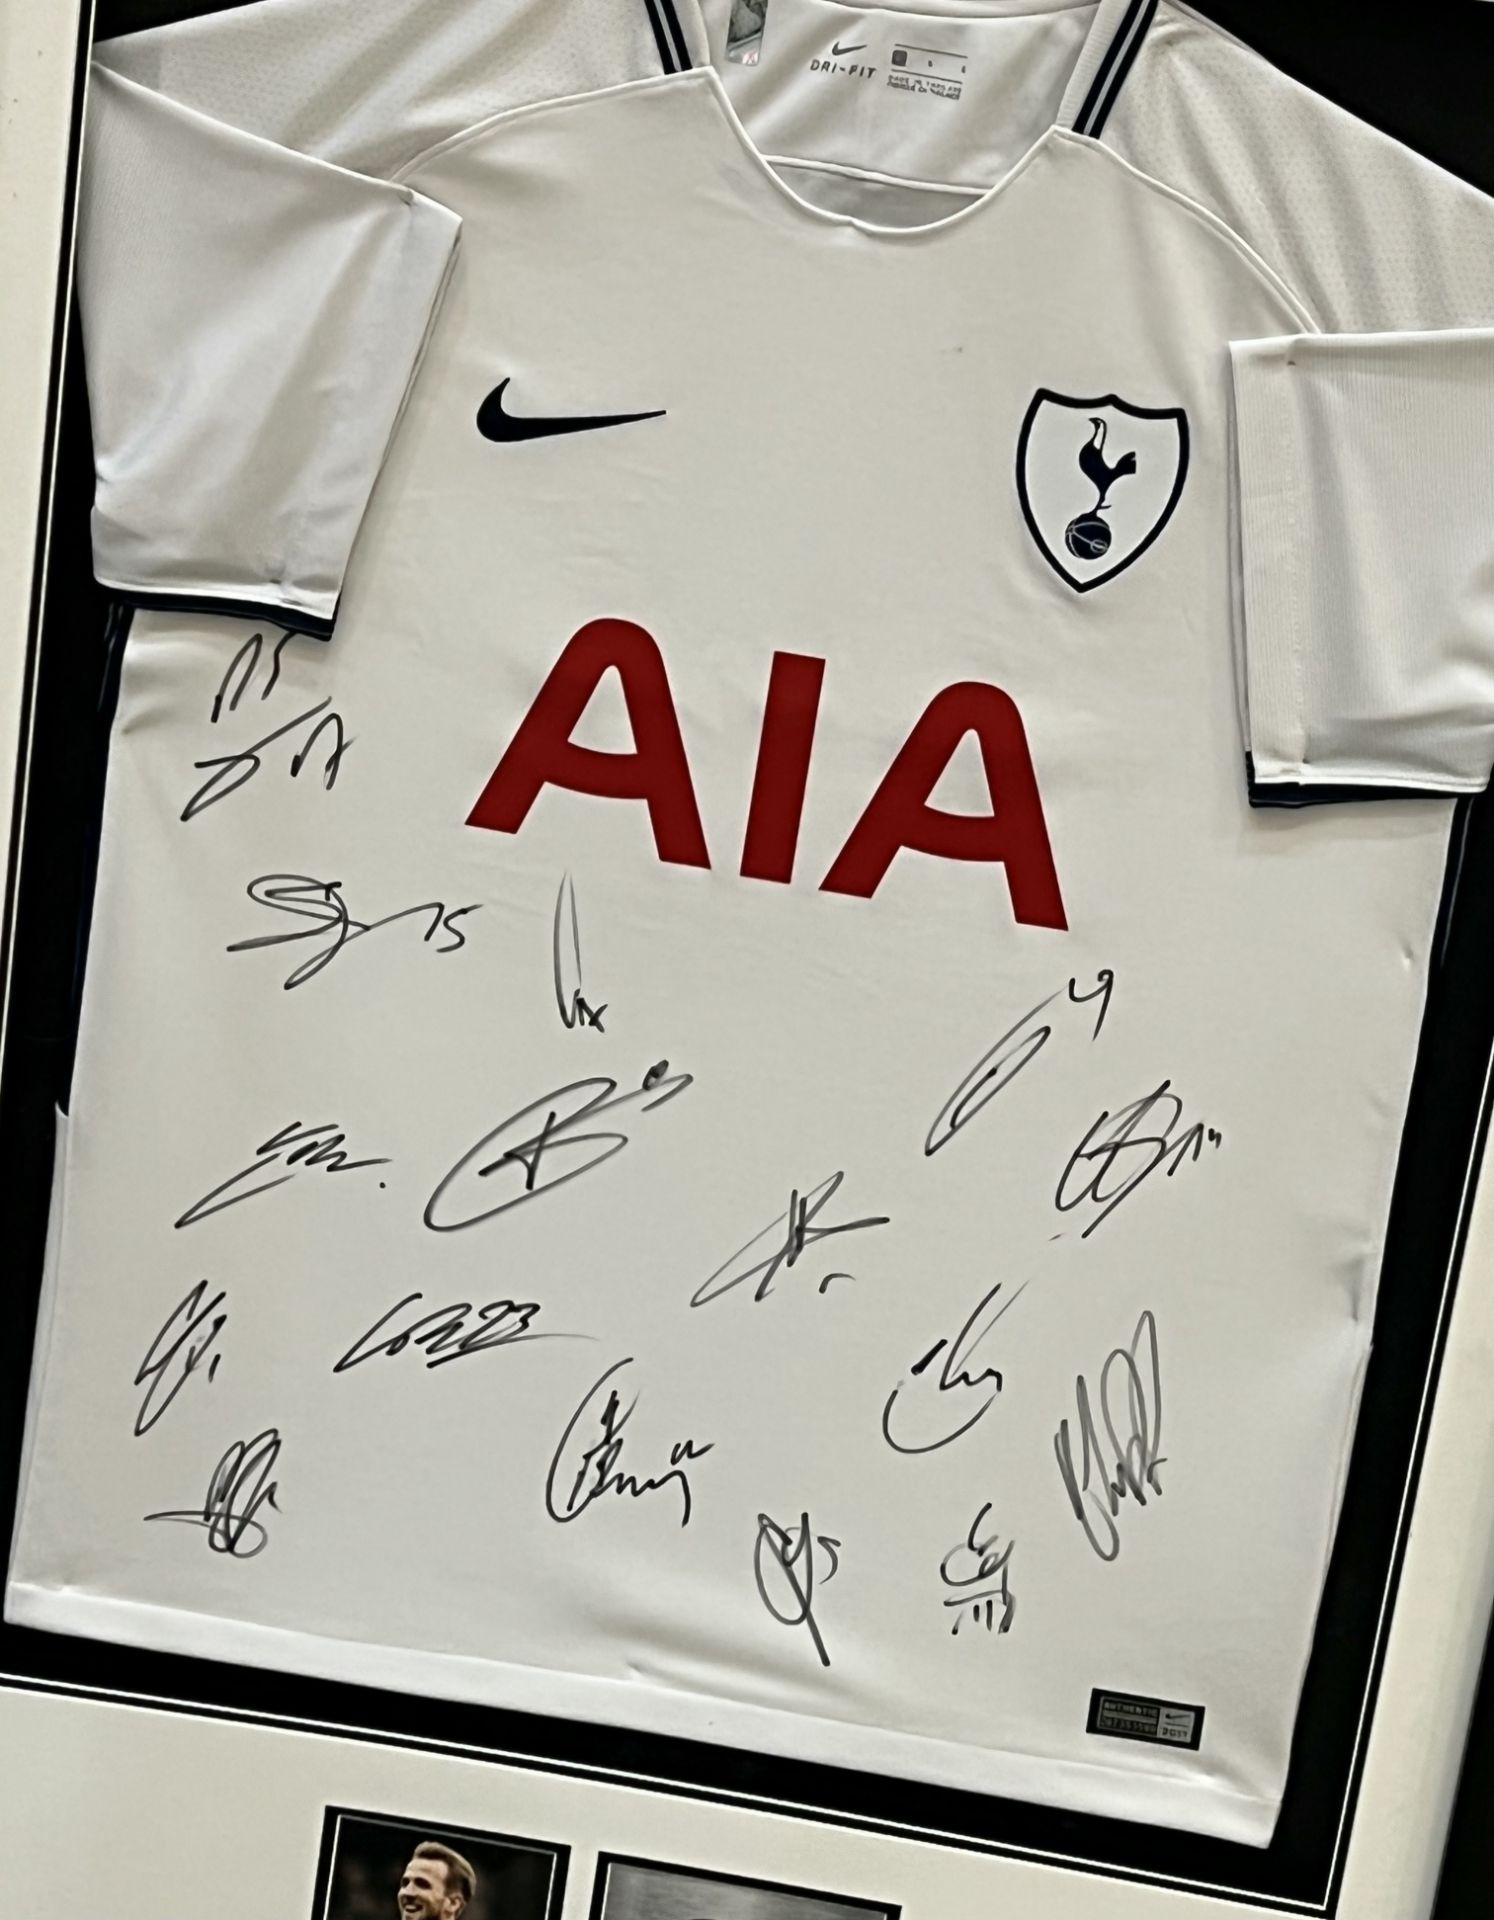 Authentic Tottenham Hotspur hand signed shirt display from the season 2017-18. The 17 signatories - Image 2 of 12